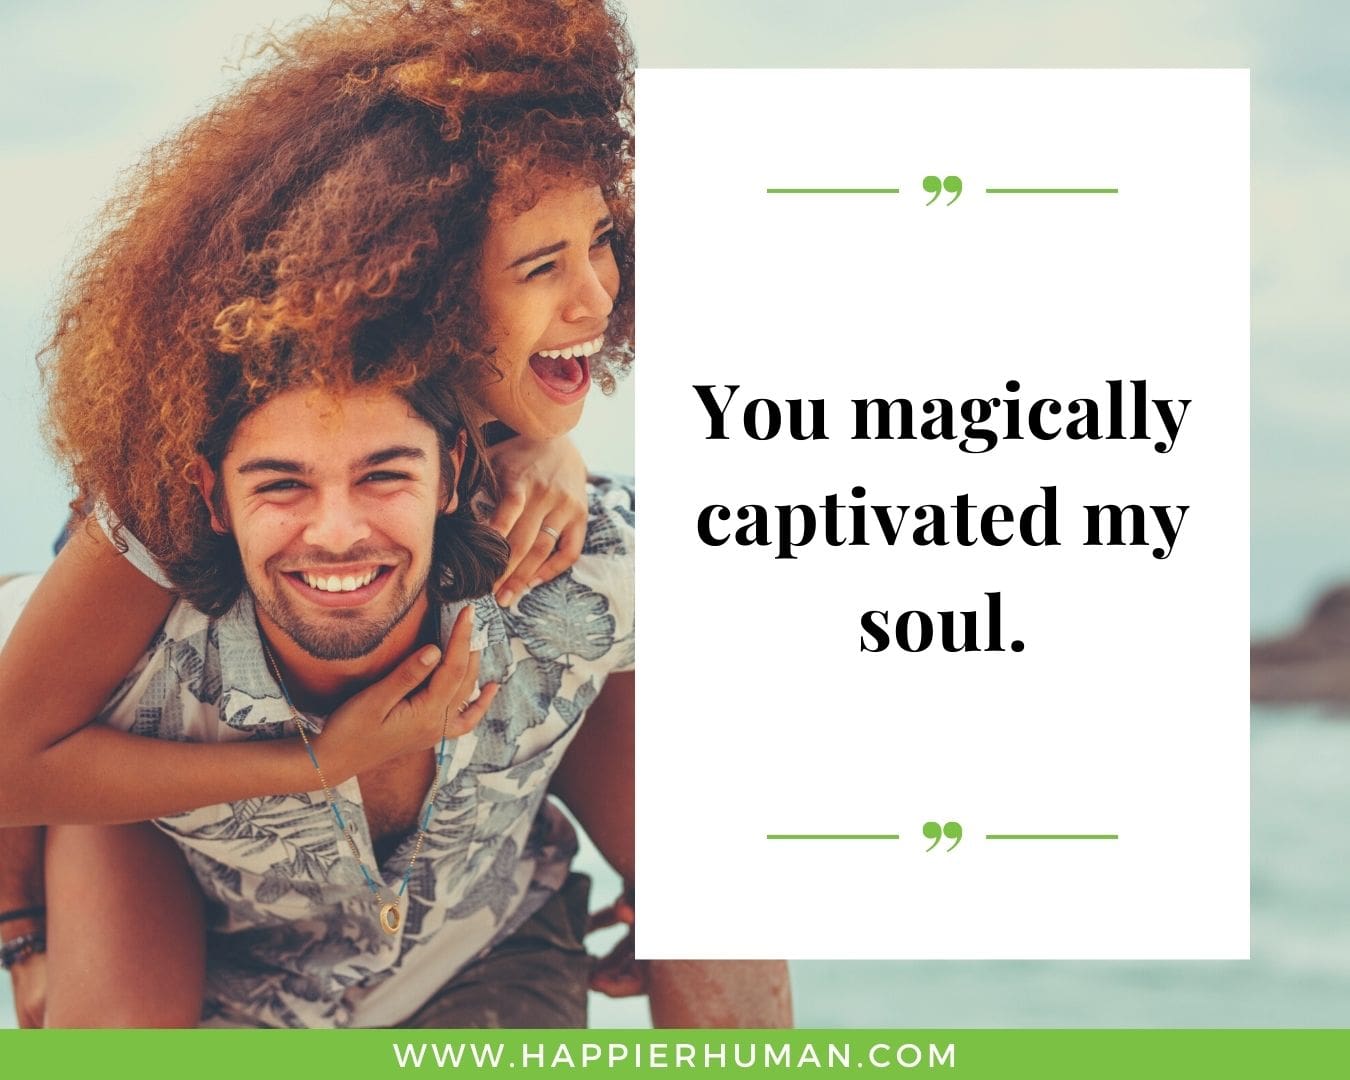 Short, Deep Love Quotes for Her - “You magically captivated my soul.”